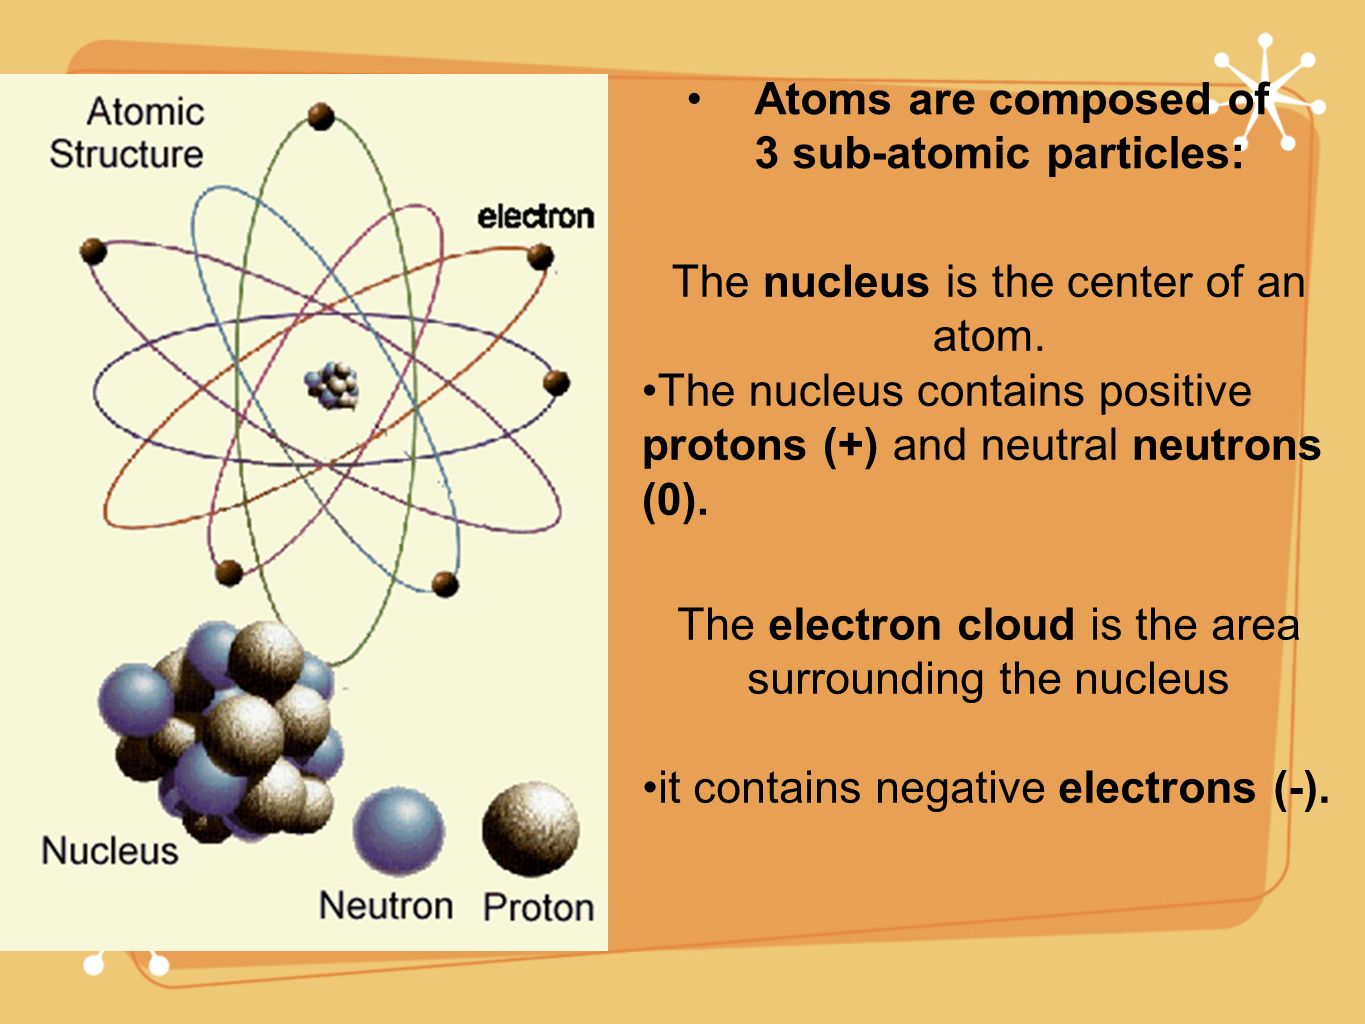 The nucleus is the center of an atom.